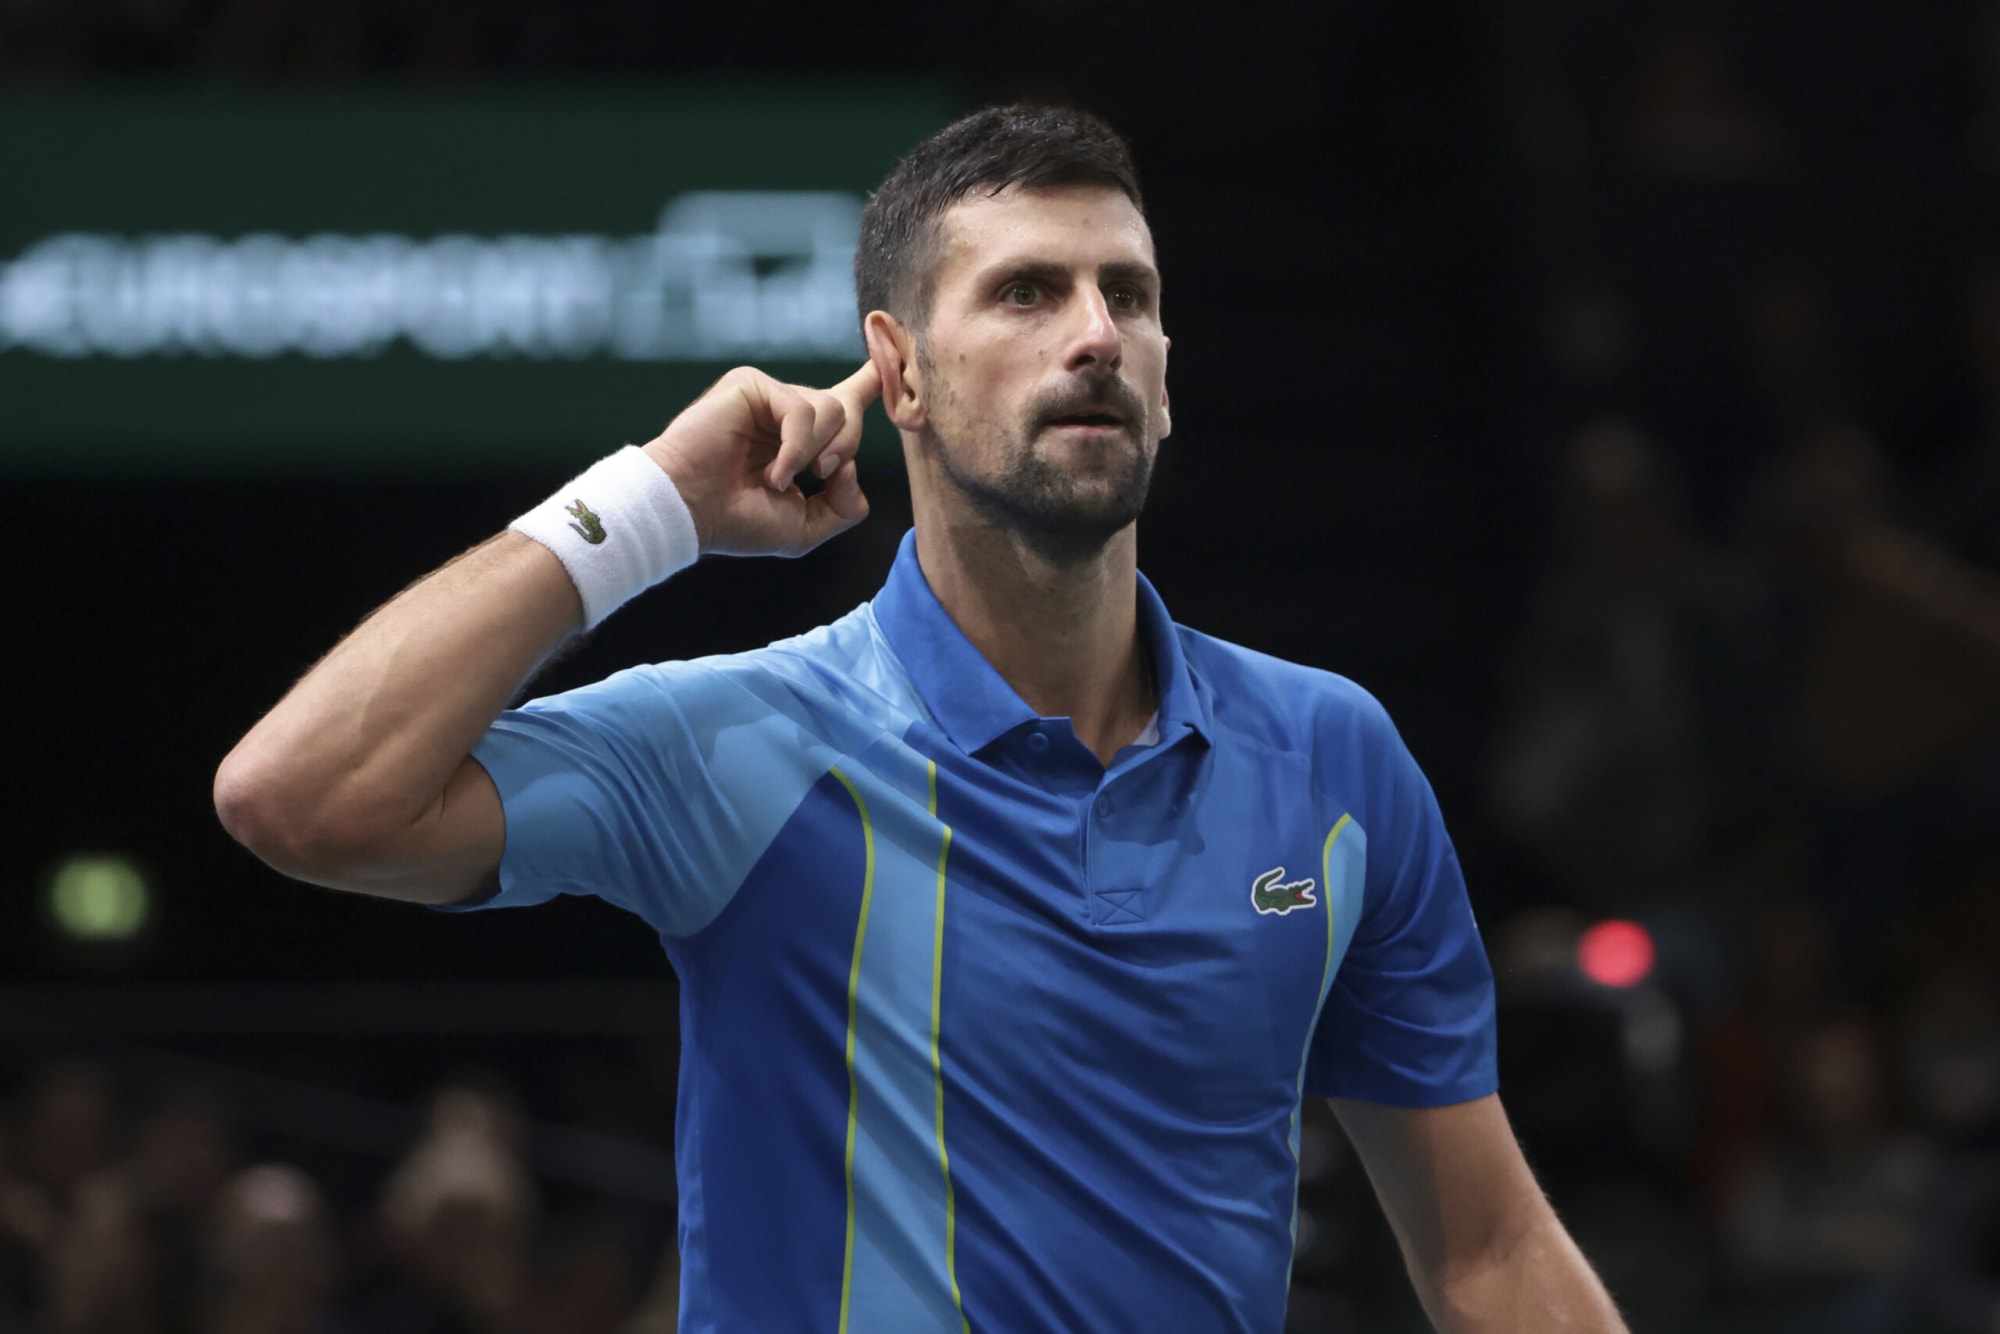 Novak Djokovic needs to do one simple thing to hold on to year-end No. 1